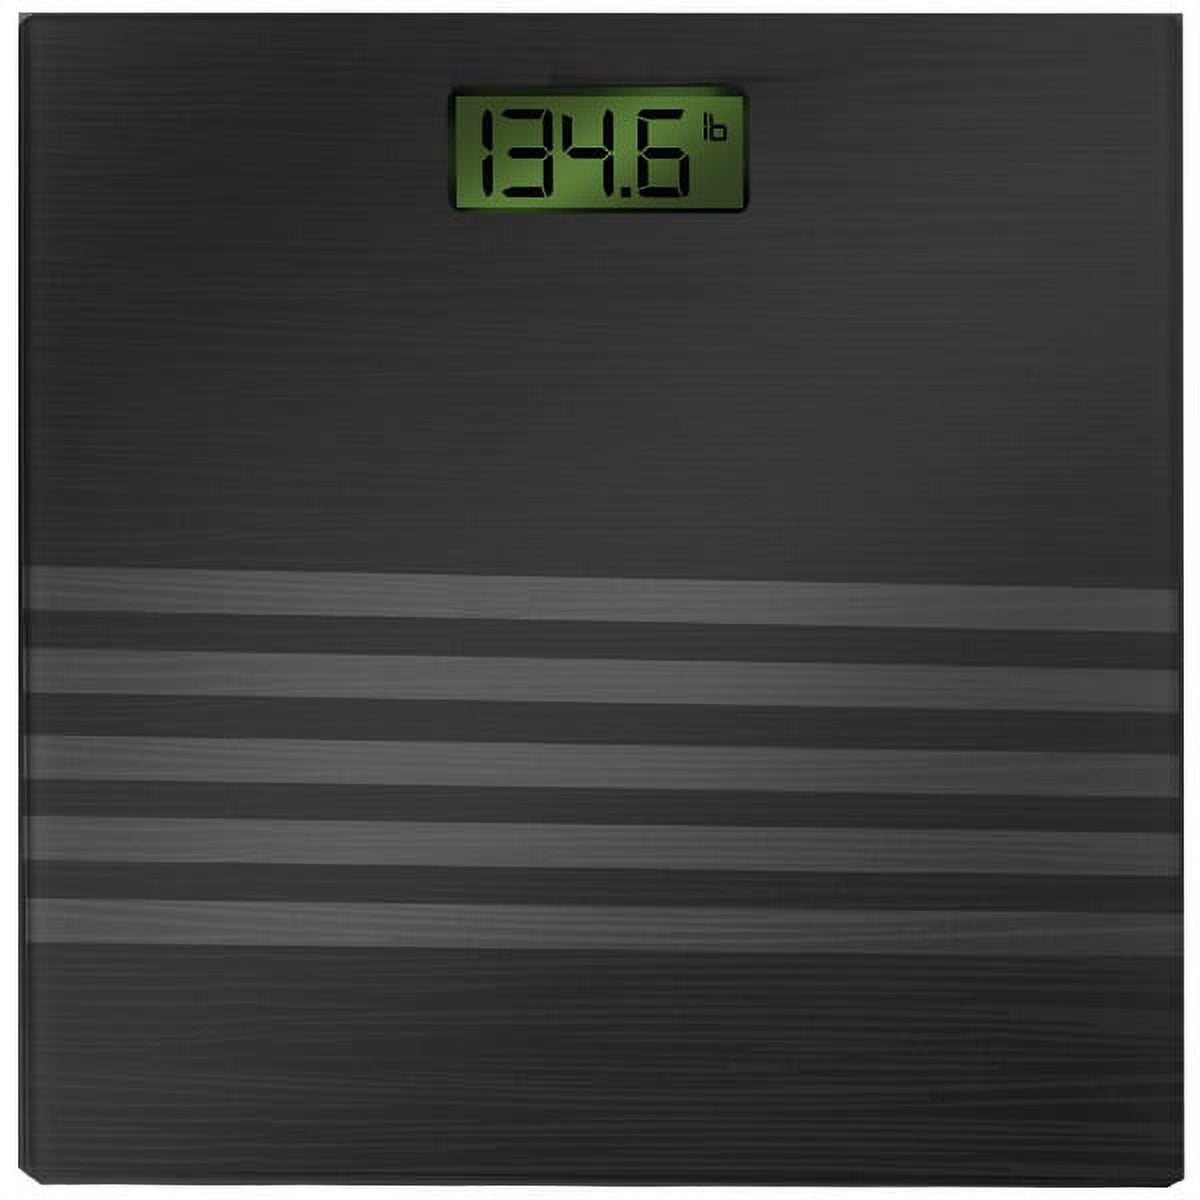 Sakar Ballys Total Fitness Body Analysis Scale in Gray and Clear